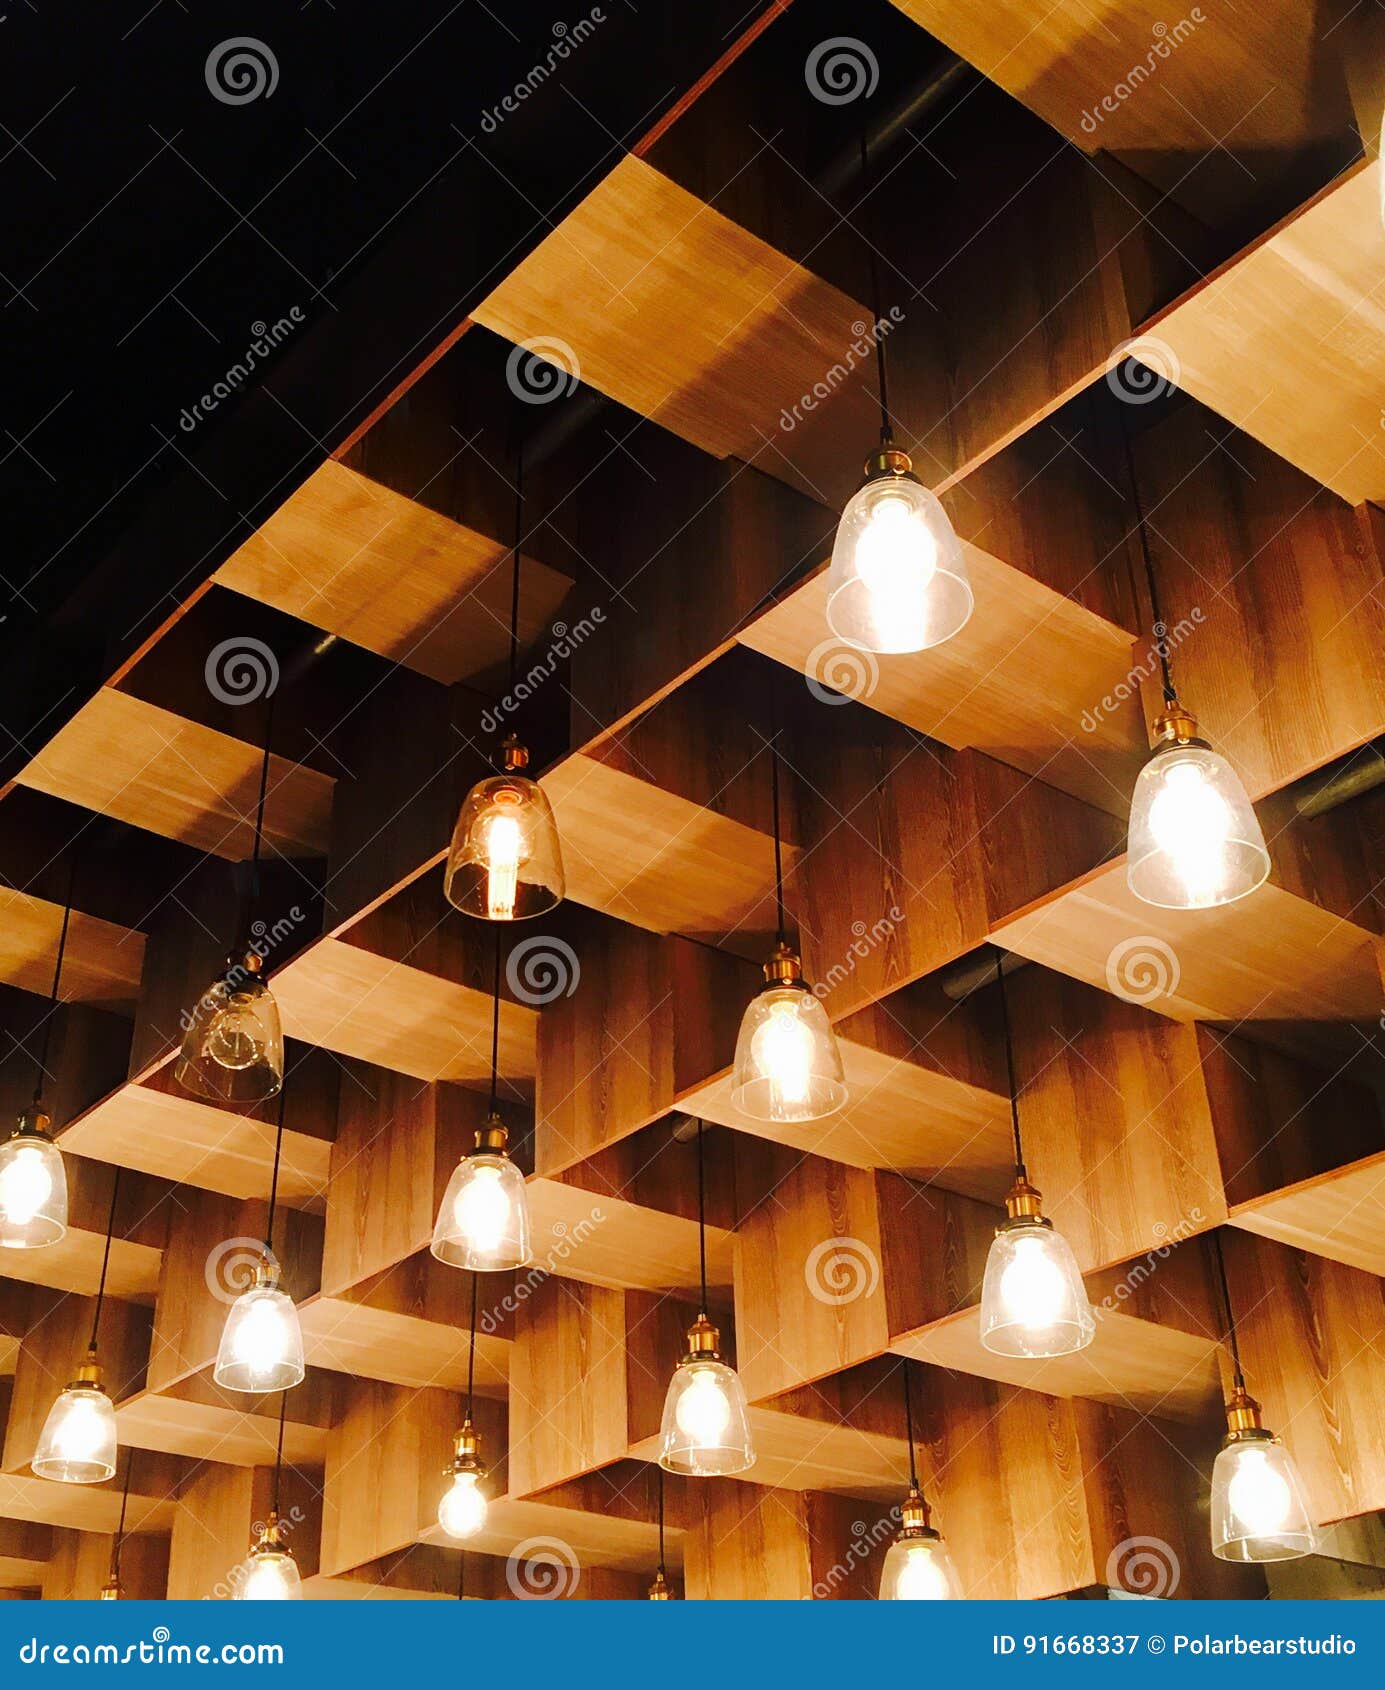 Wooden Ceiling Pattern With Lighting Interior Design Stock Image